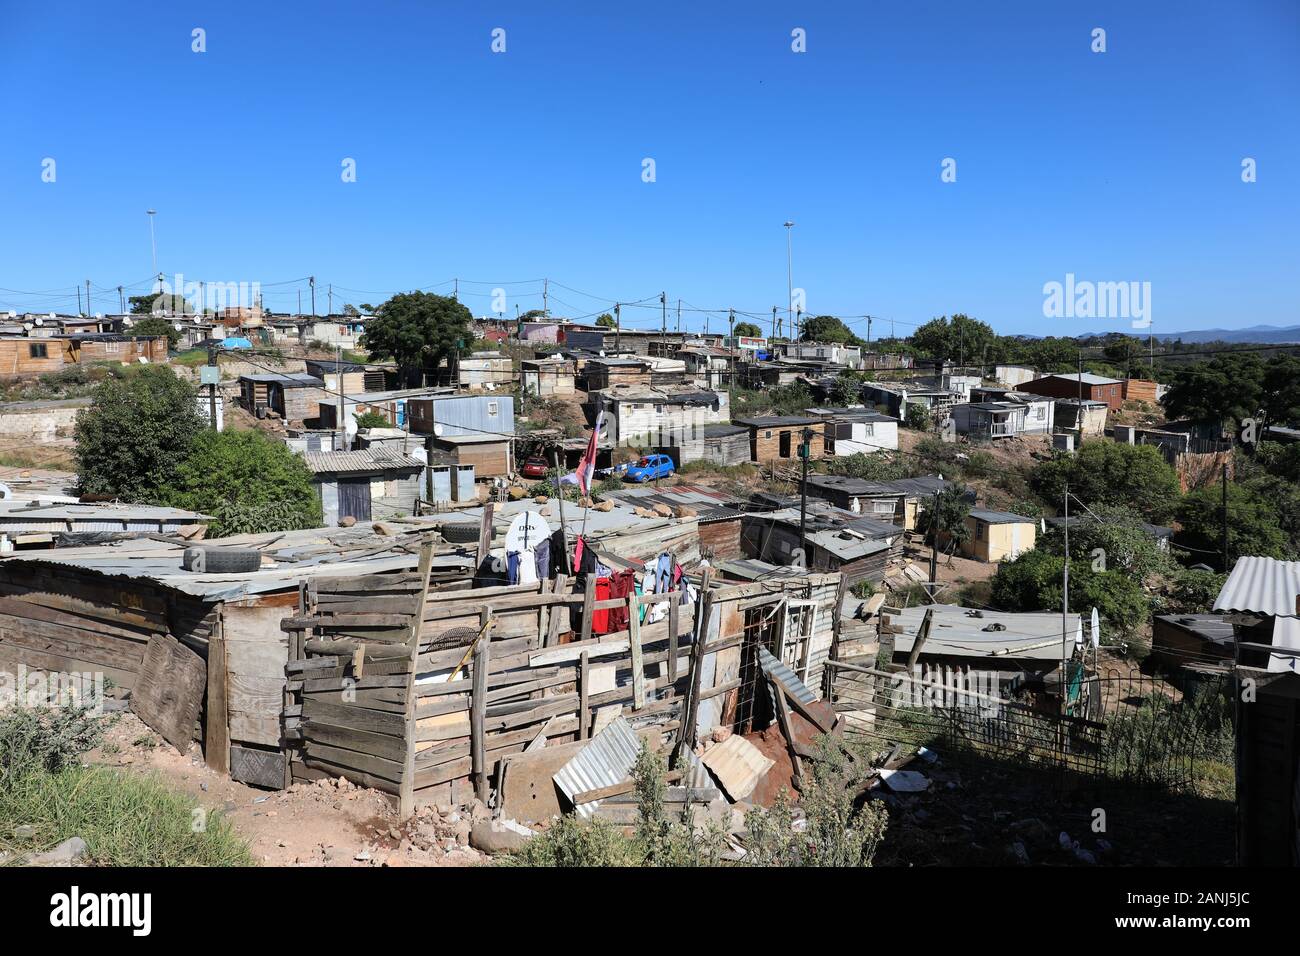 Township in Sud Africa Foto Stock